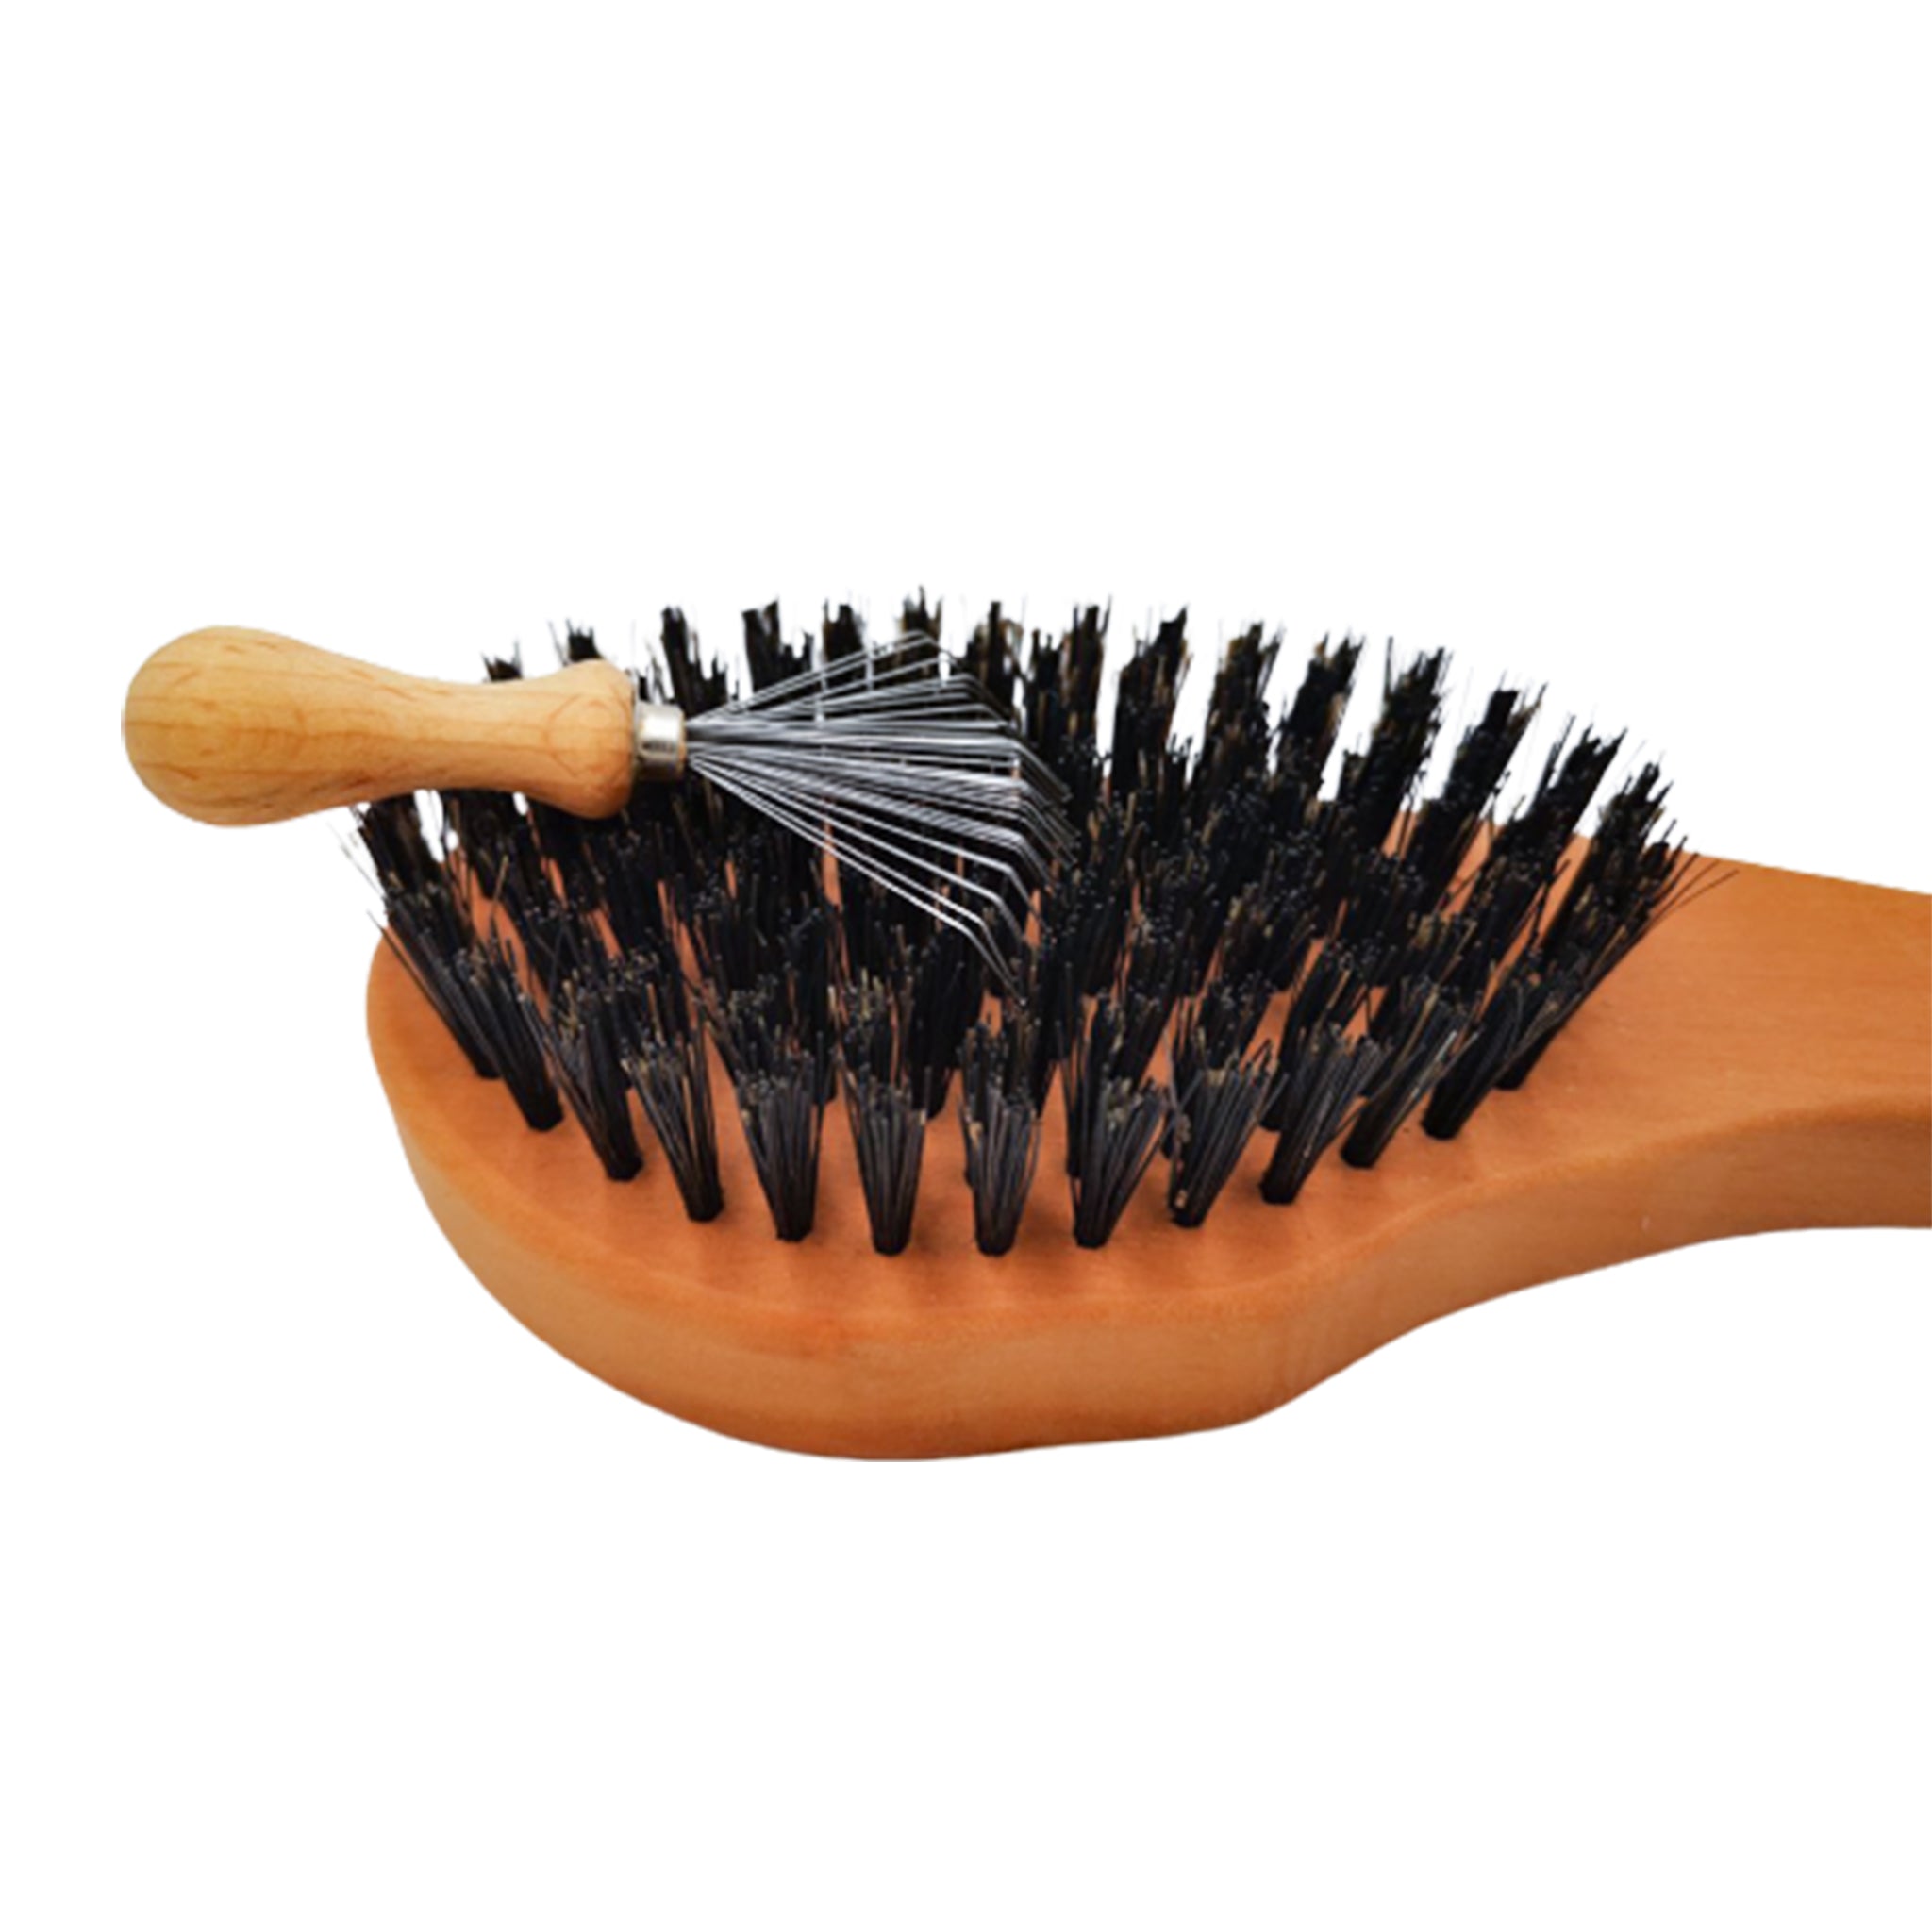 Professional brush cleaner "Kralle-Kalle" made of beech wood - the natural hair remover